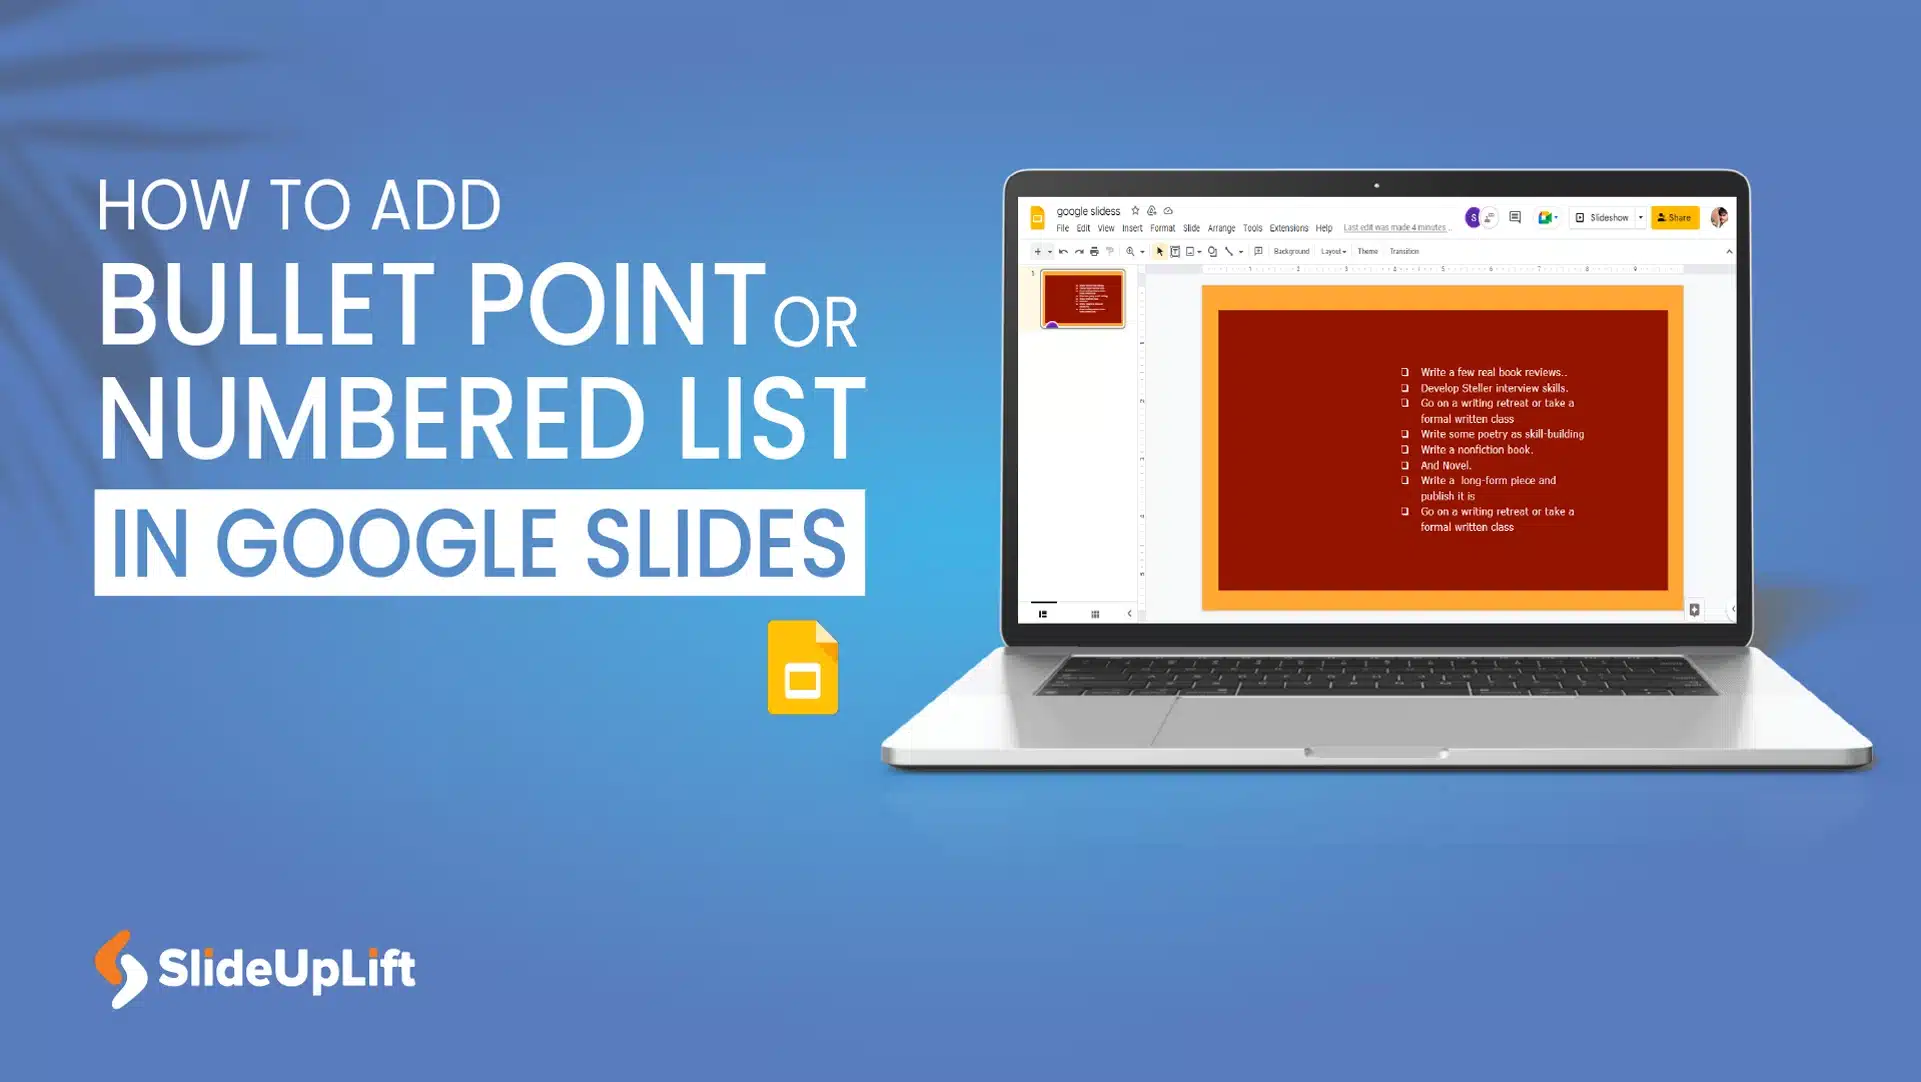 Learn How To Add Bullet Points In Google Slides